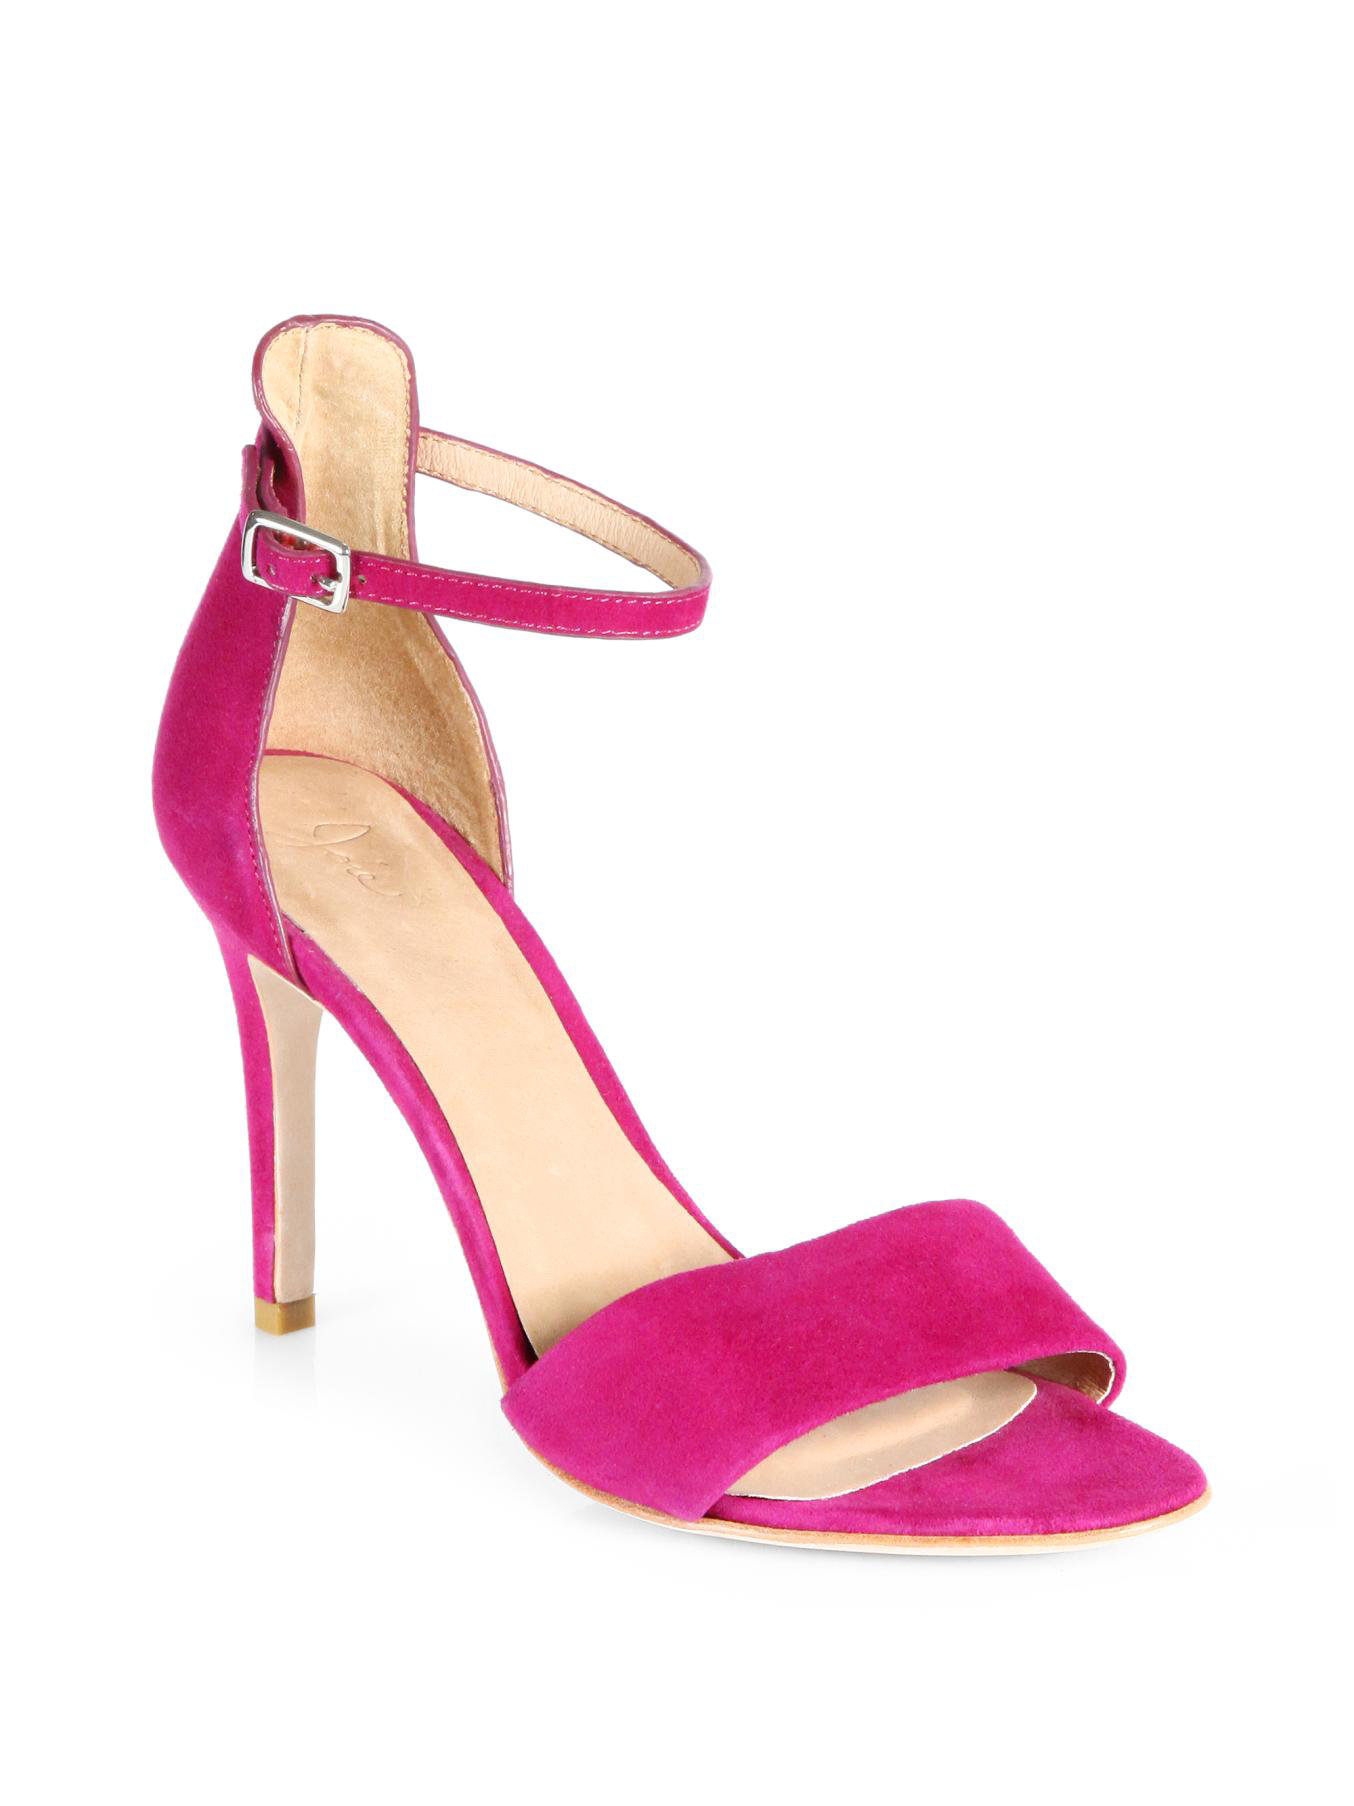 Joie Jaclyn Suede Sandals in Berry (Pink) - Lyst